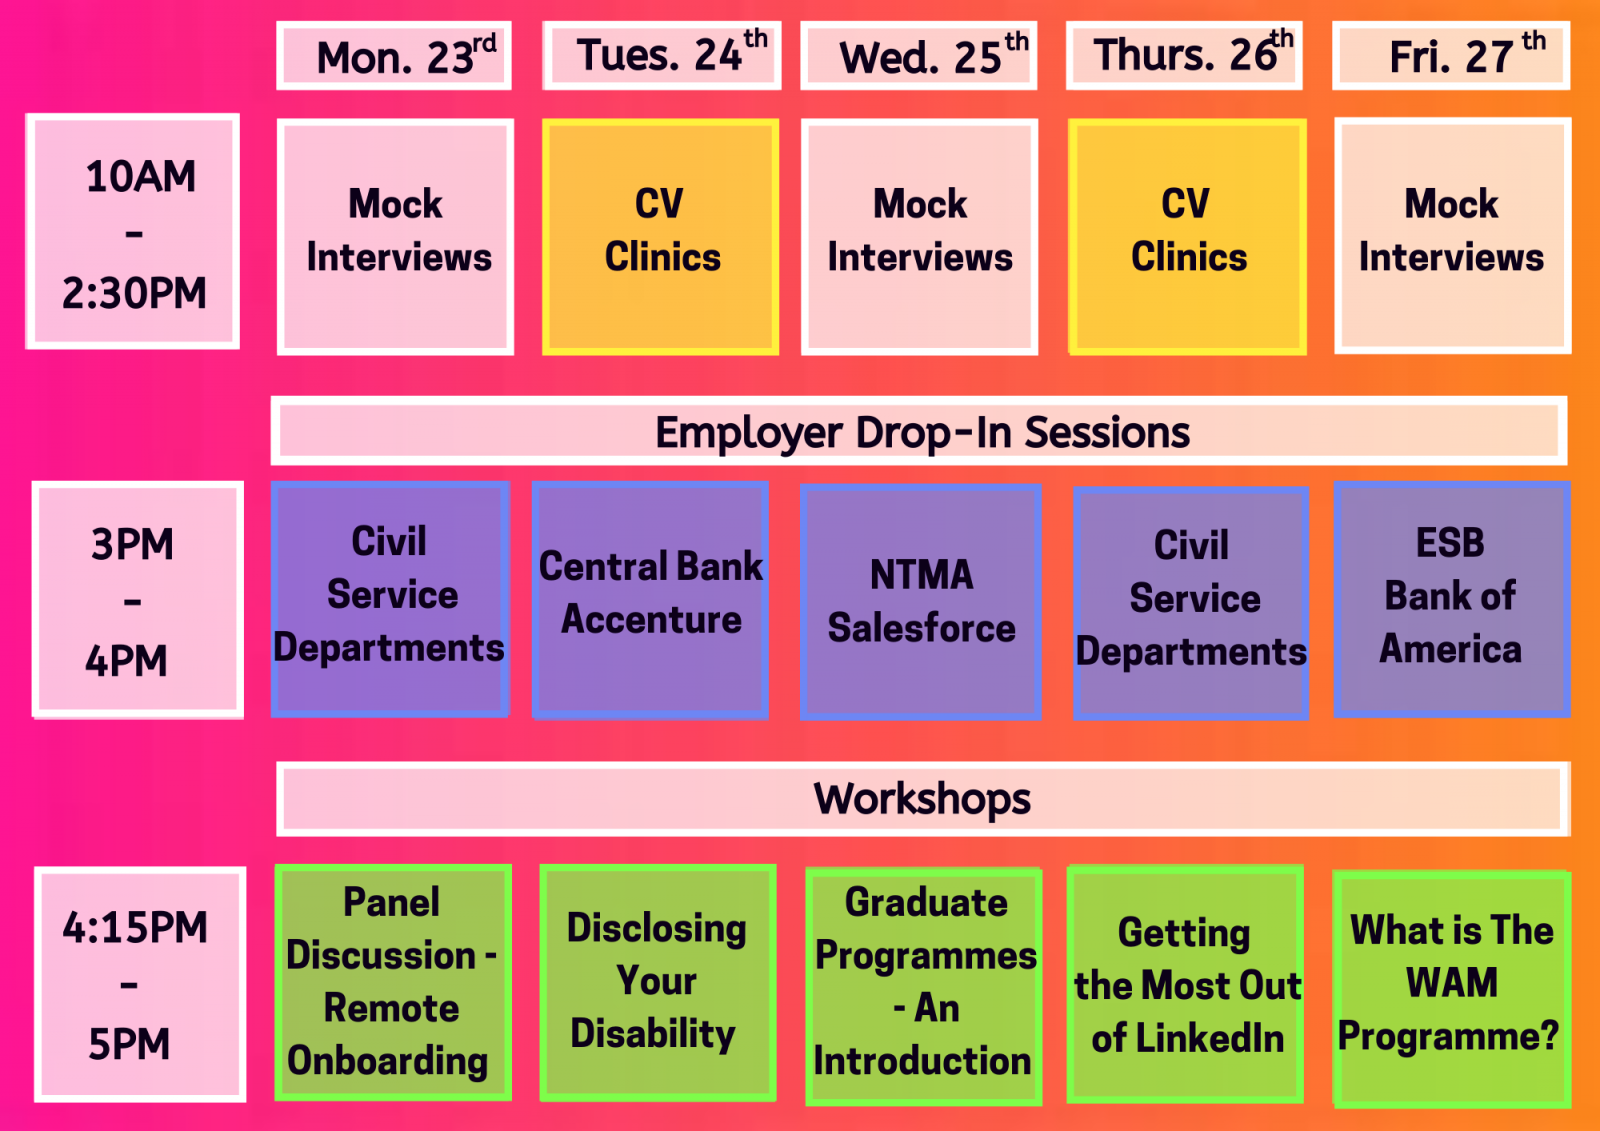 Schedule: Monday, Wednesdays and Fridays from 10am - 2.30pm are mock interviews. CV clinics on Tuesdays and Thursday from 10am - 2.30pm. Employer Drop In everyday from 3pm - 4pm. Workshops from Tuesday - Fridays at 4.15pm. Panel discussion on Monday from 4.15pm - 5pm. 